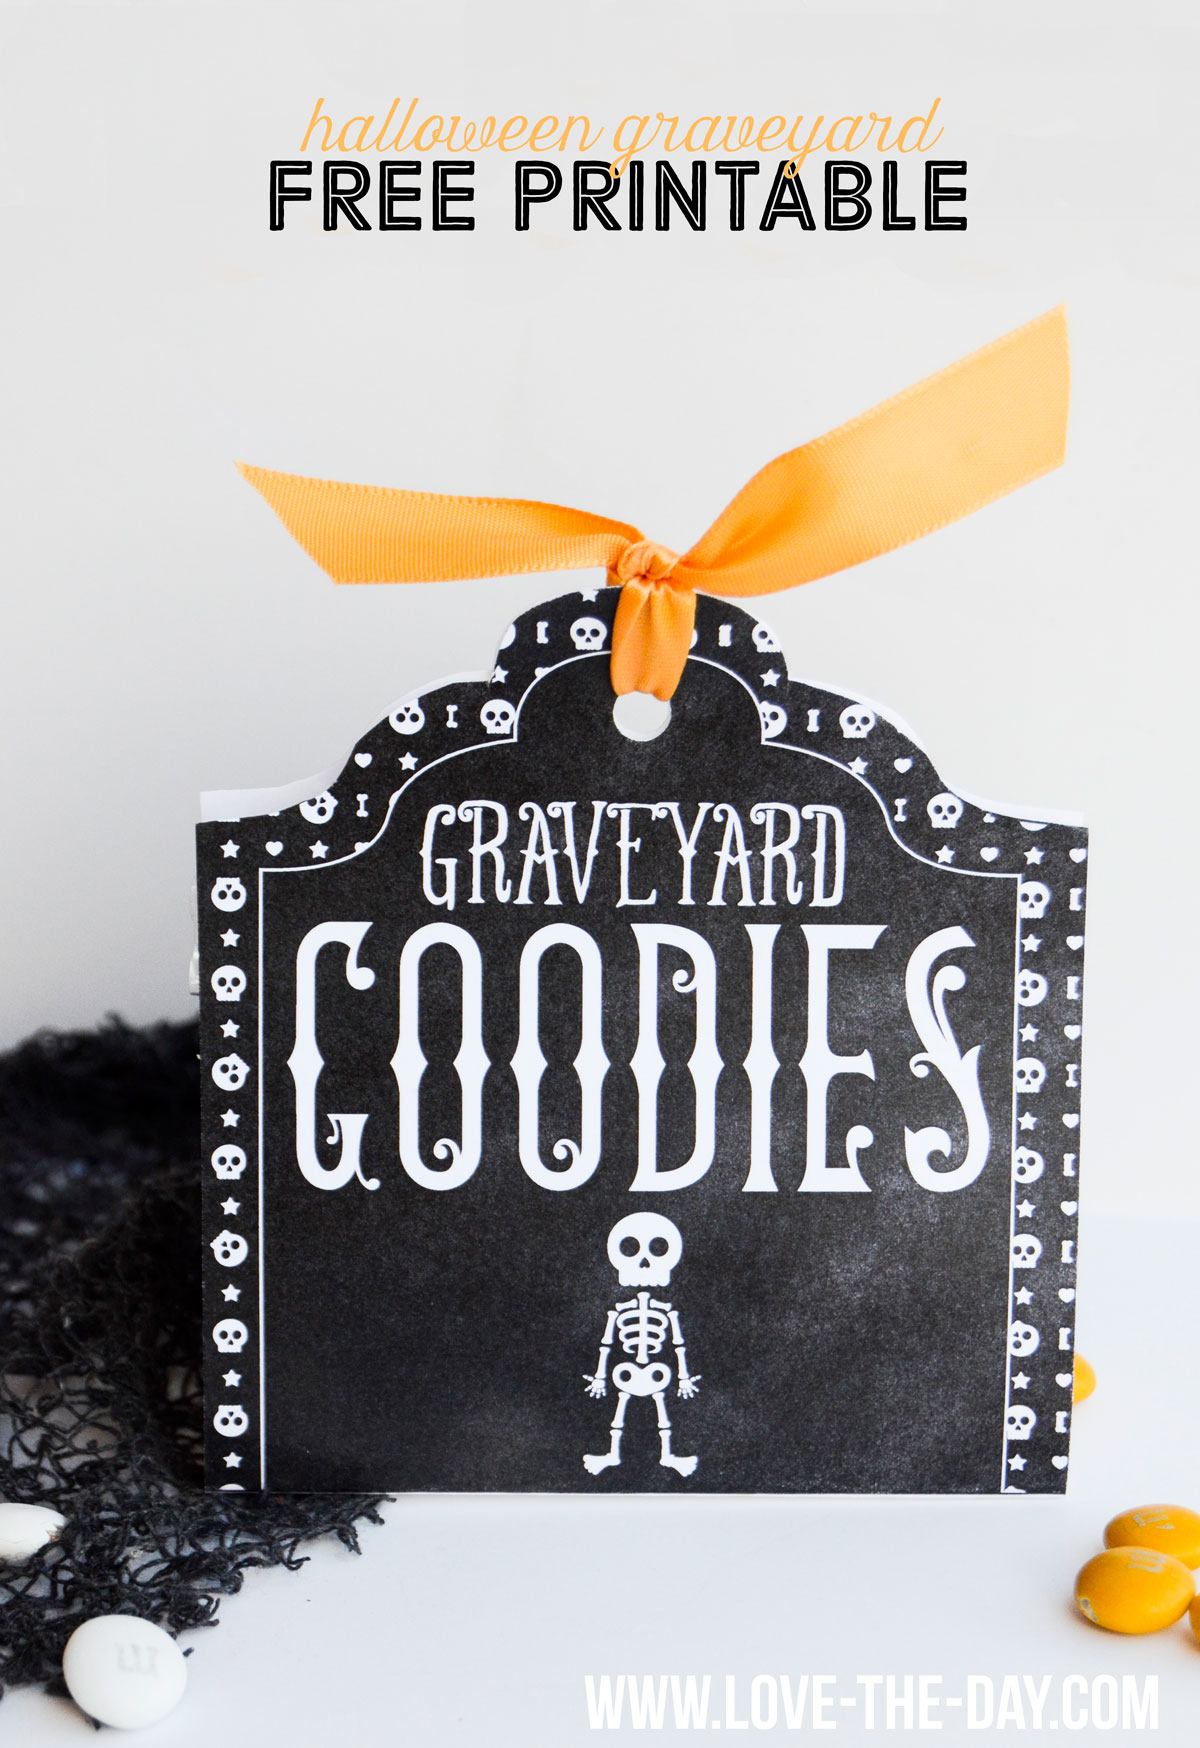 FREE Printable Tags: Graveyard Goodies by Love The Day